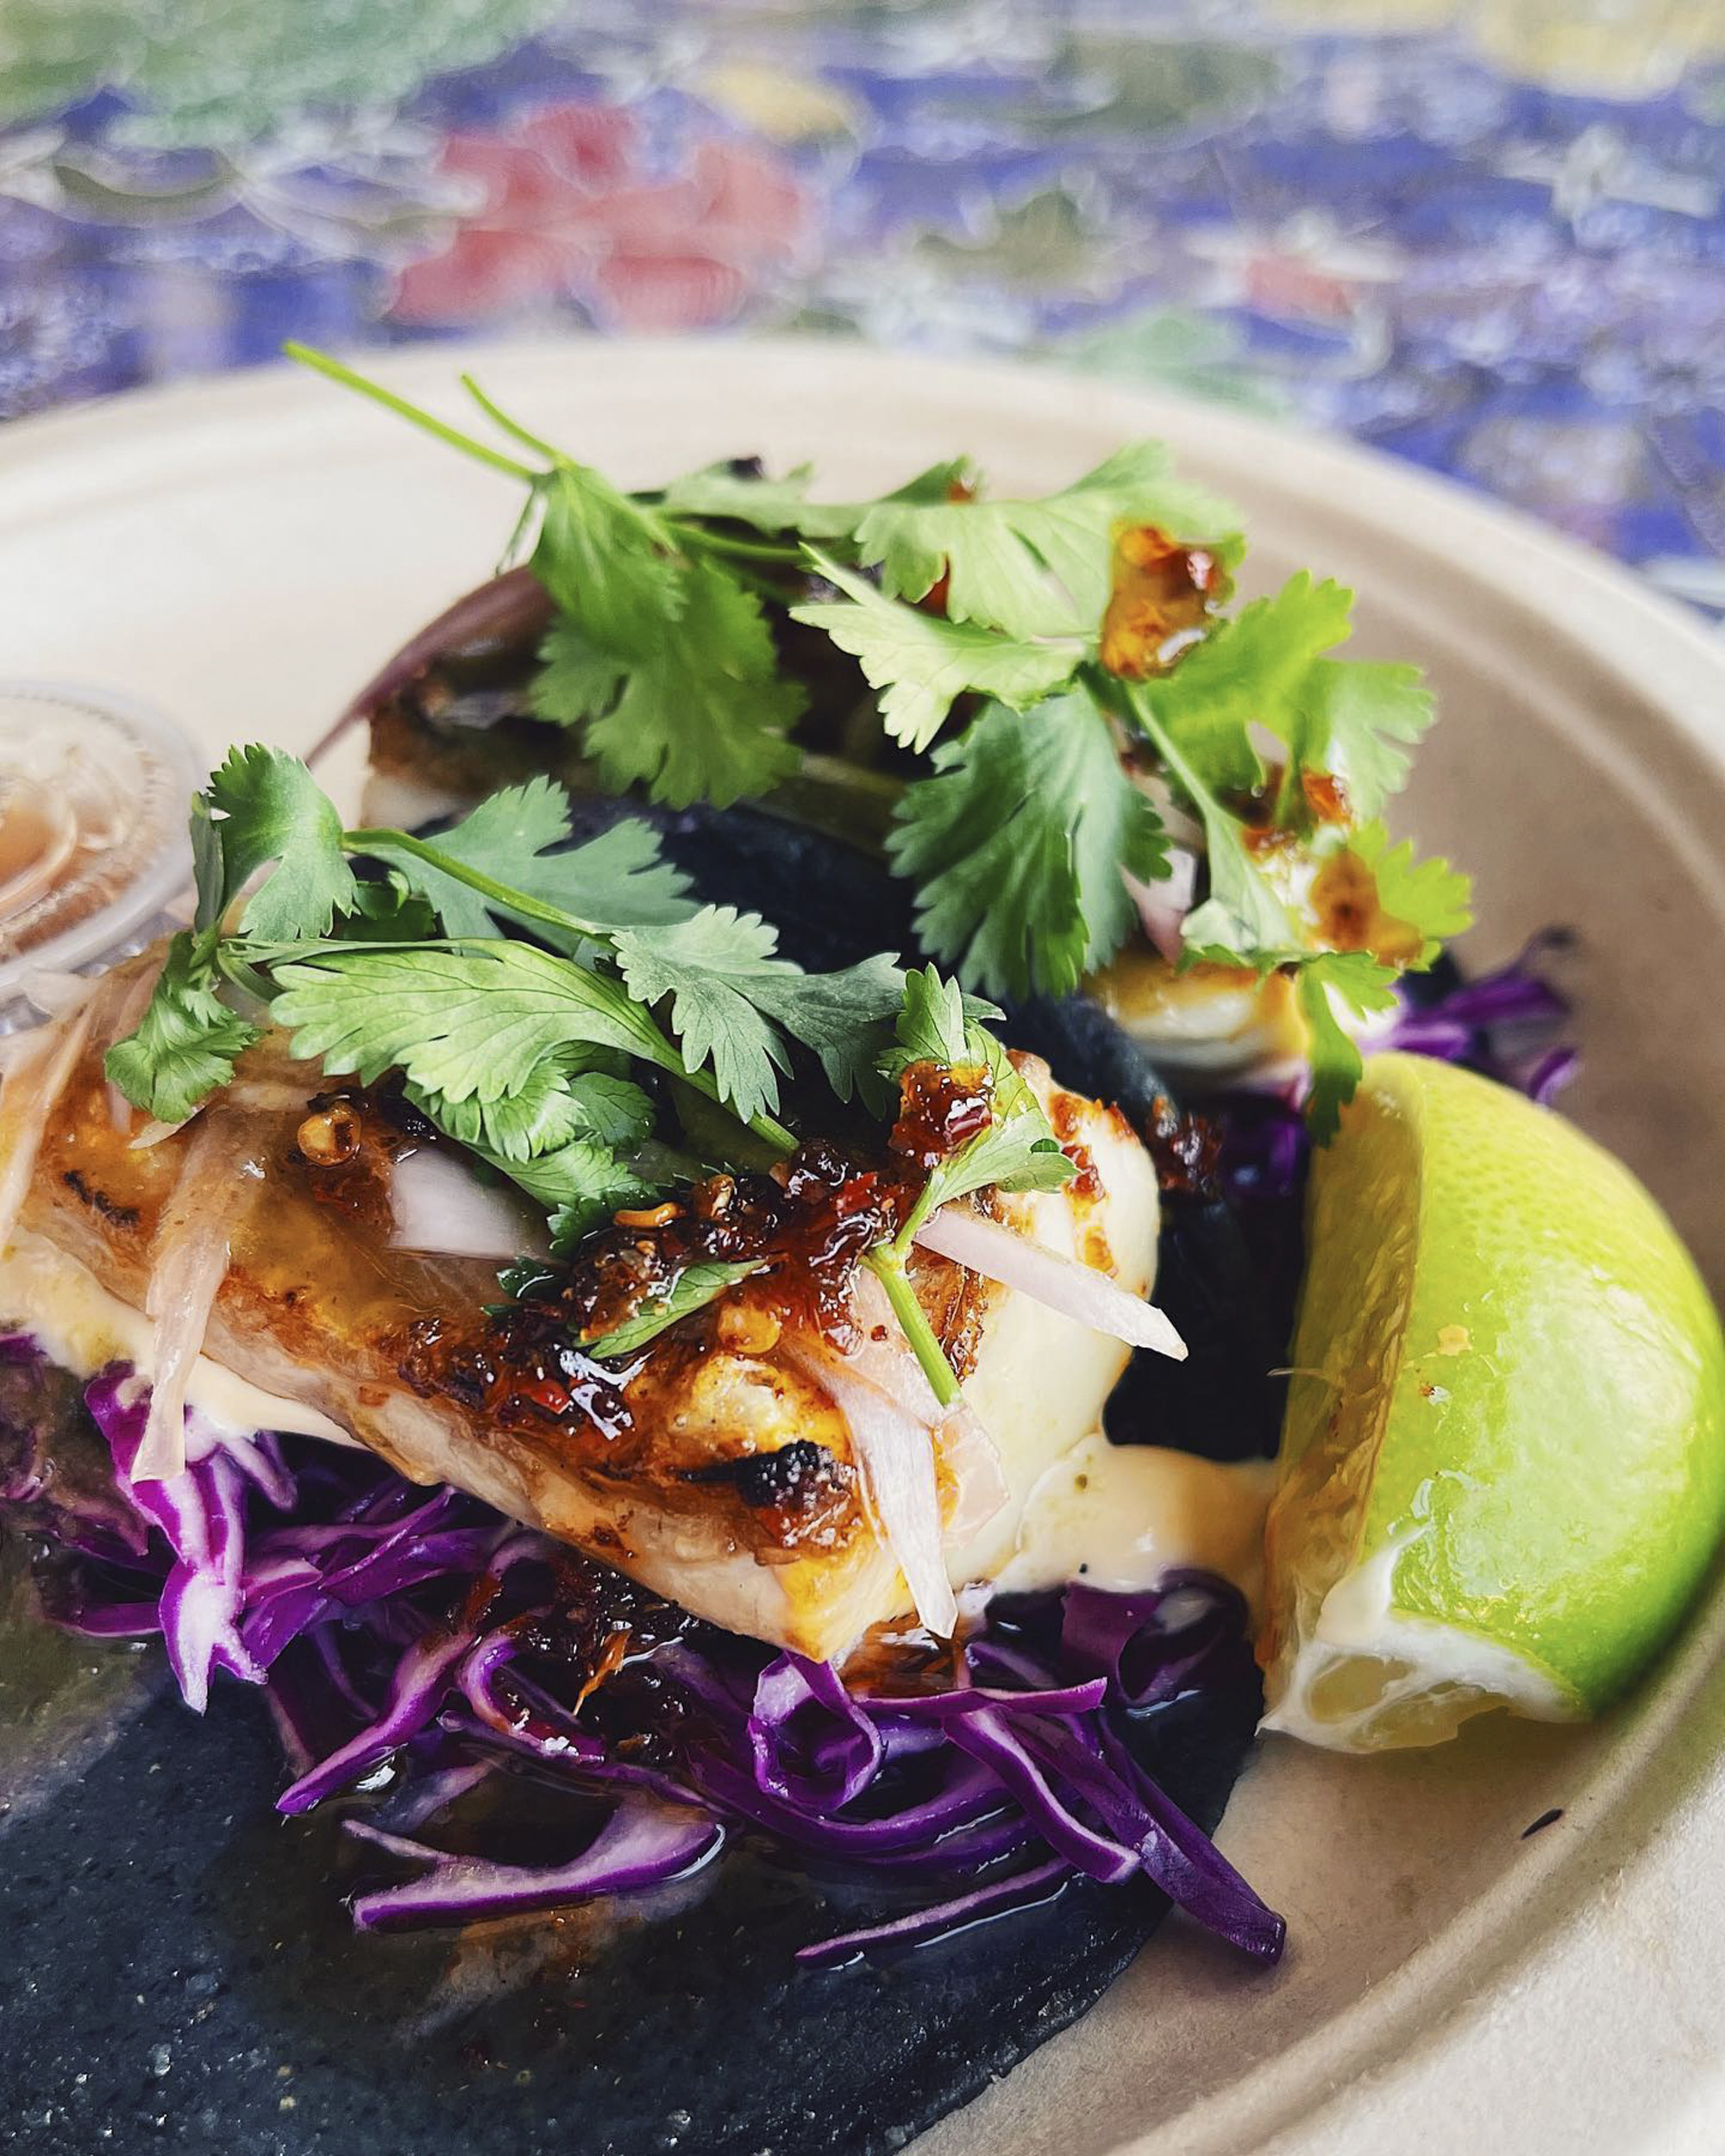 Dry-aged fish tacos at Anajak Thai restaurant in Los Angeles. Photo: Instagram / @anajakthaifood